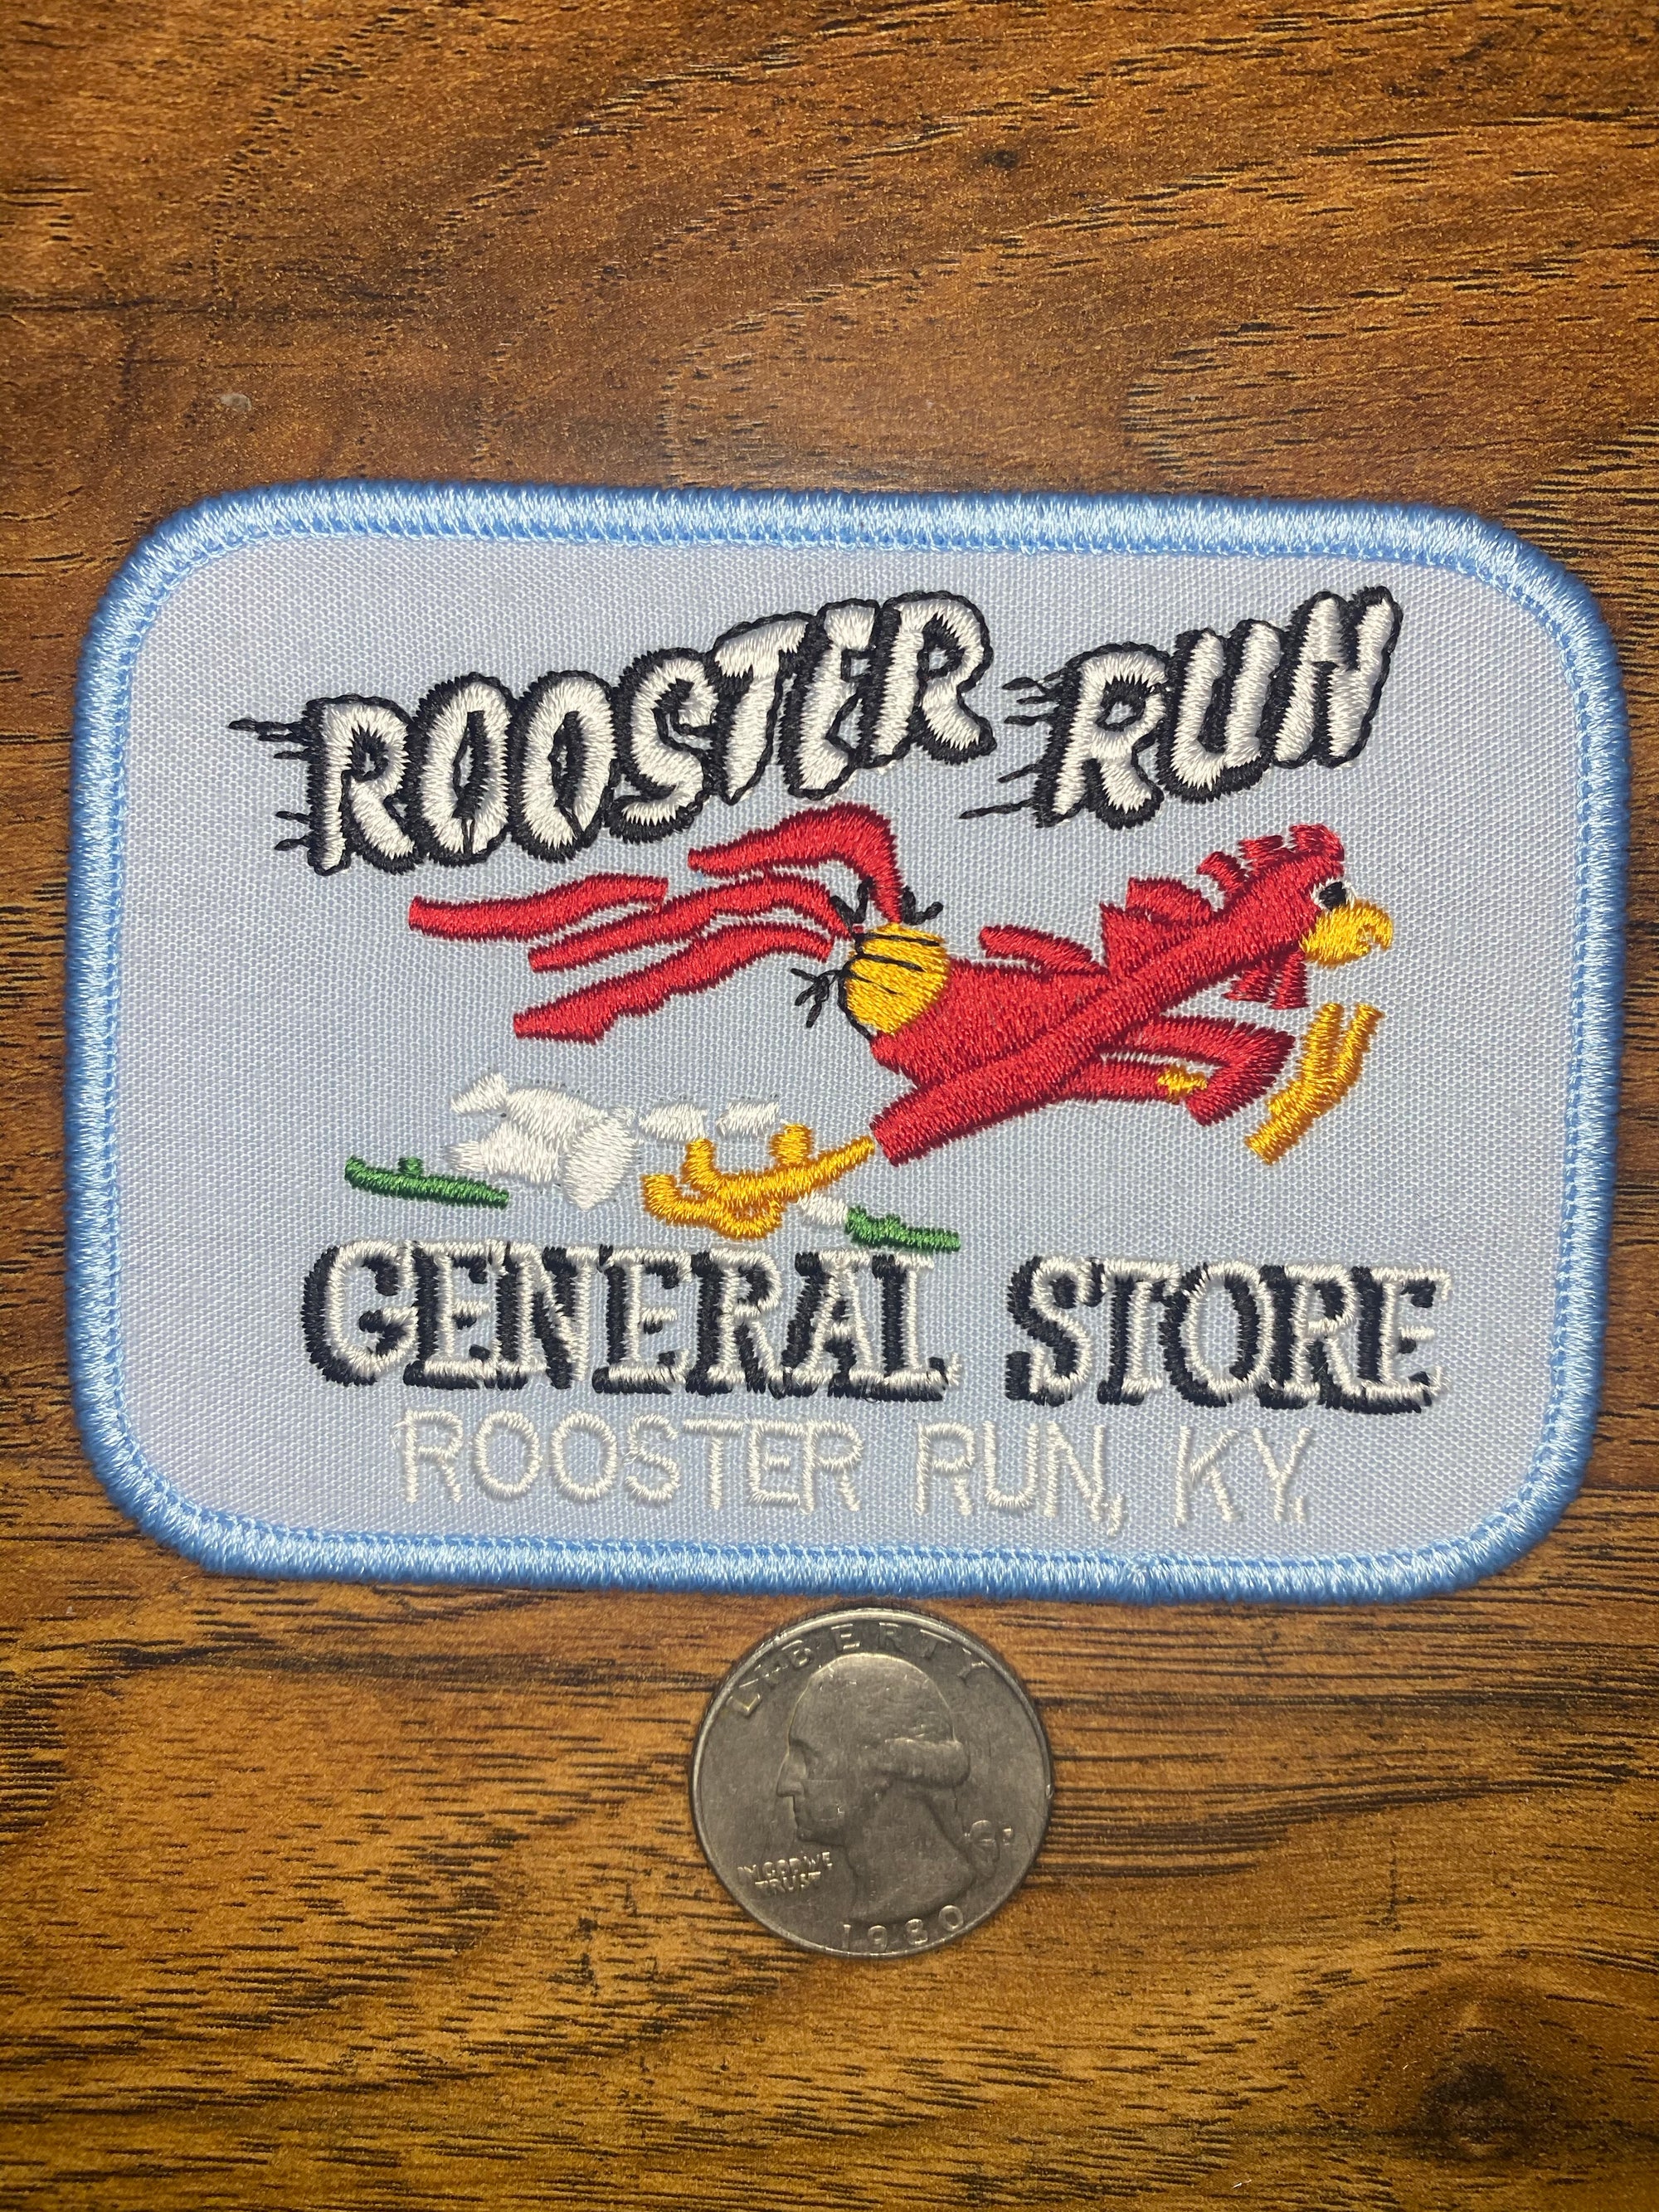 Rooster Run General Store